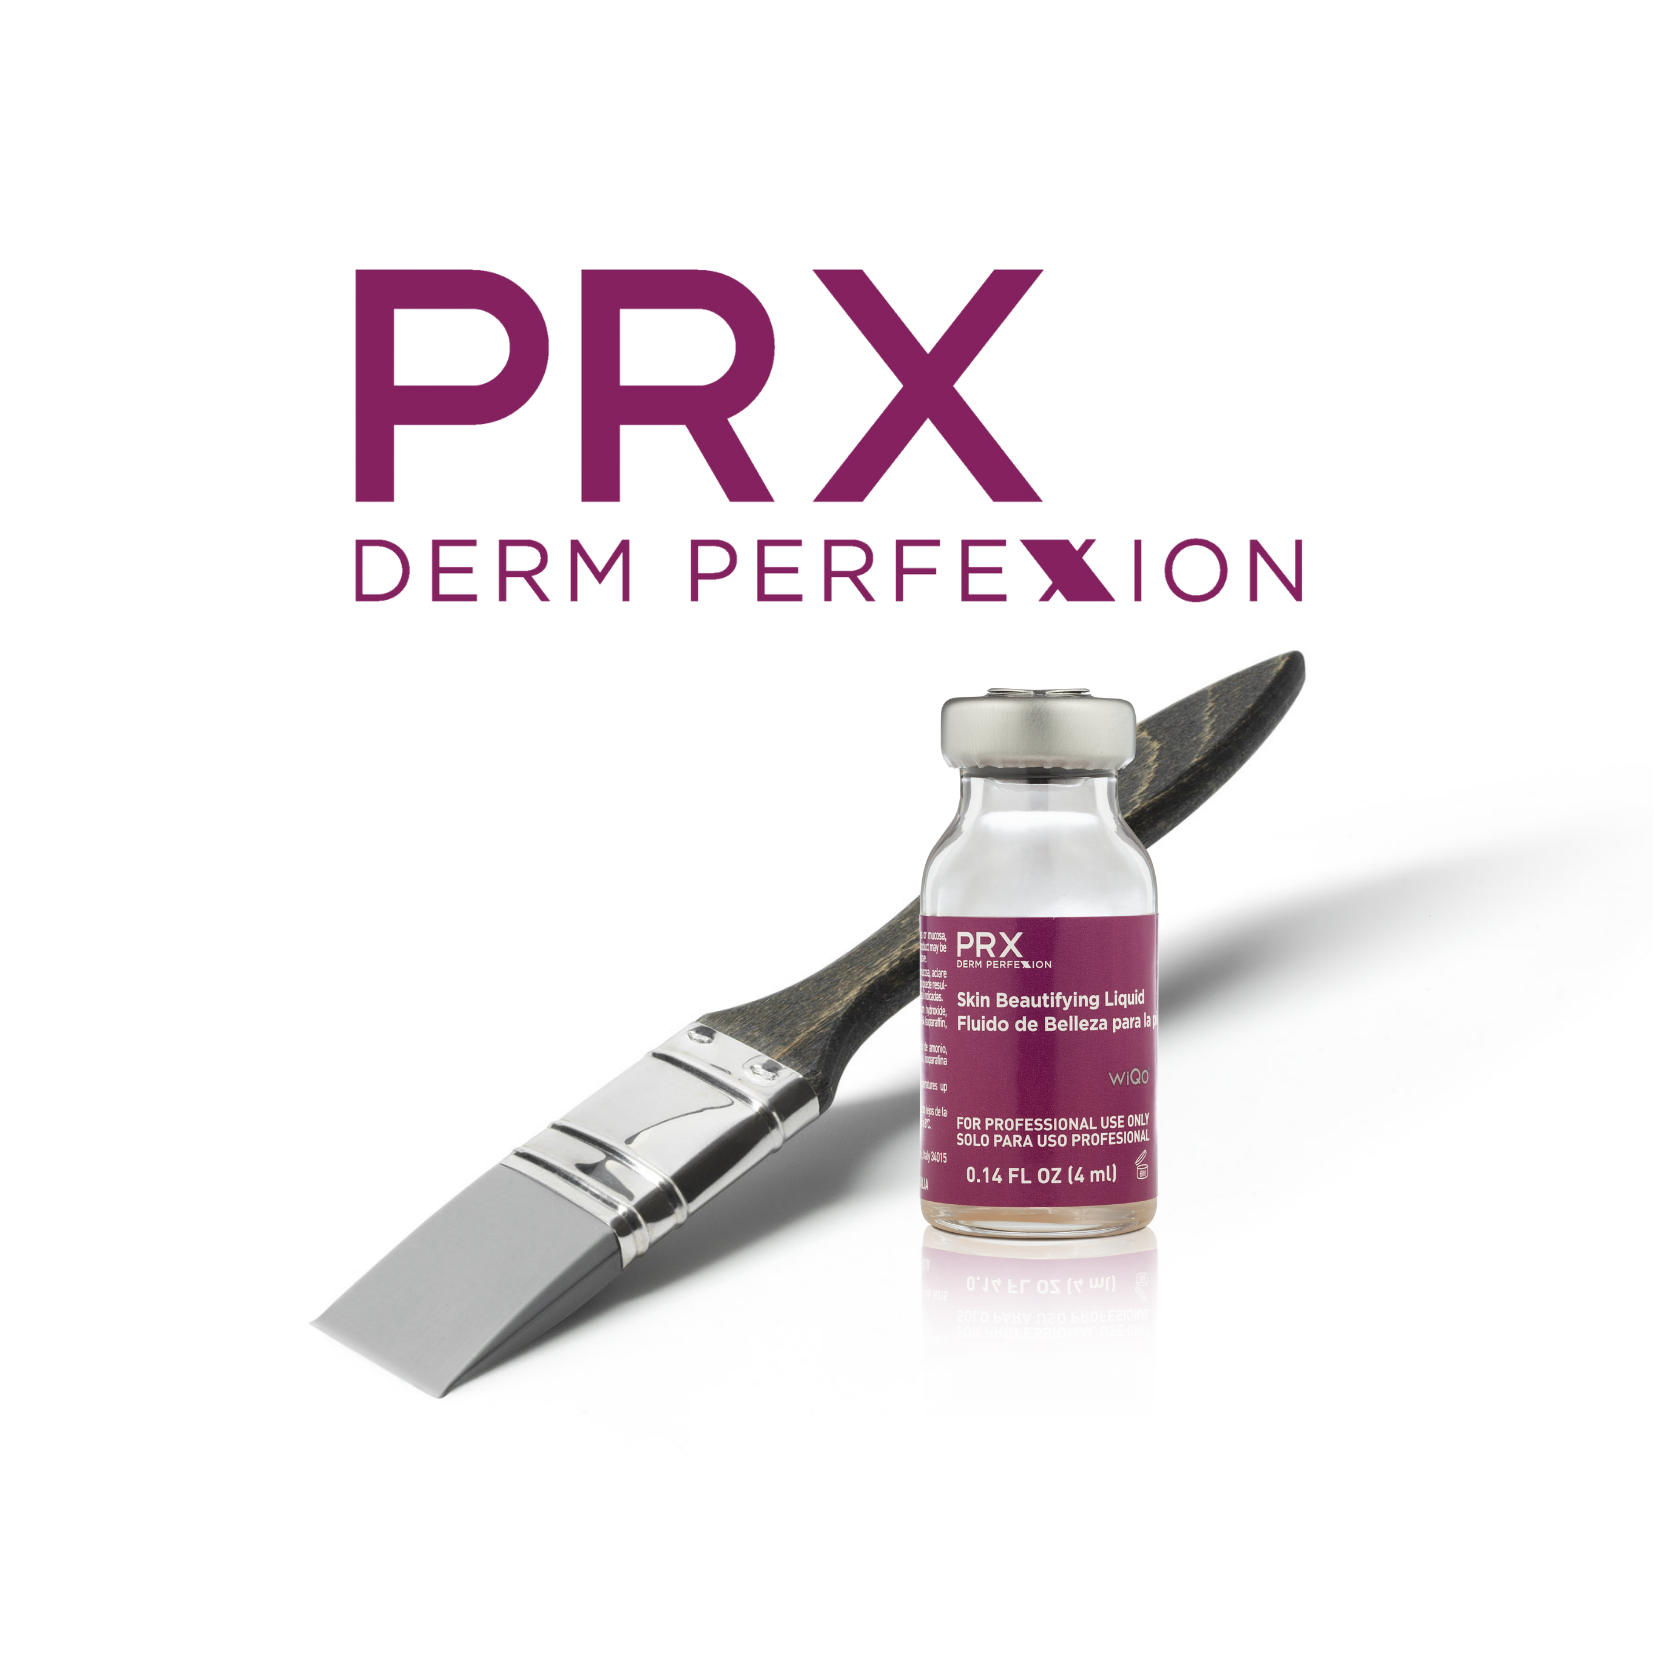 PRX-T33 Derm Perfexion Webinar: “Caring for the Body” (stretch marks, inner arms & legs, skin laxity)